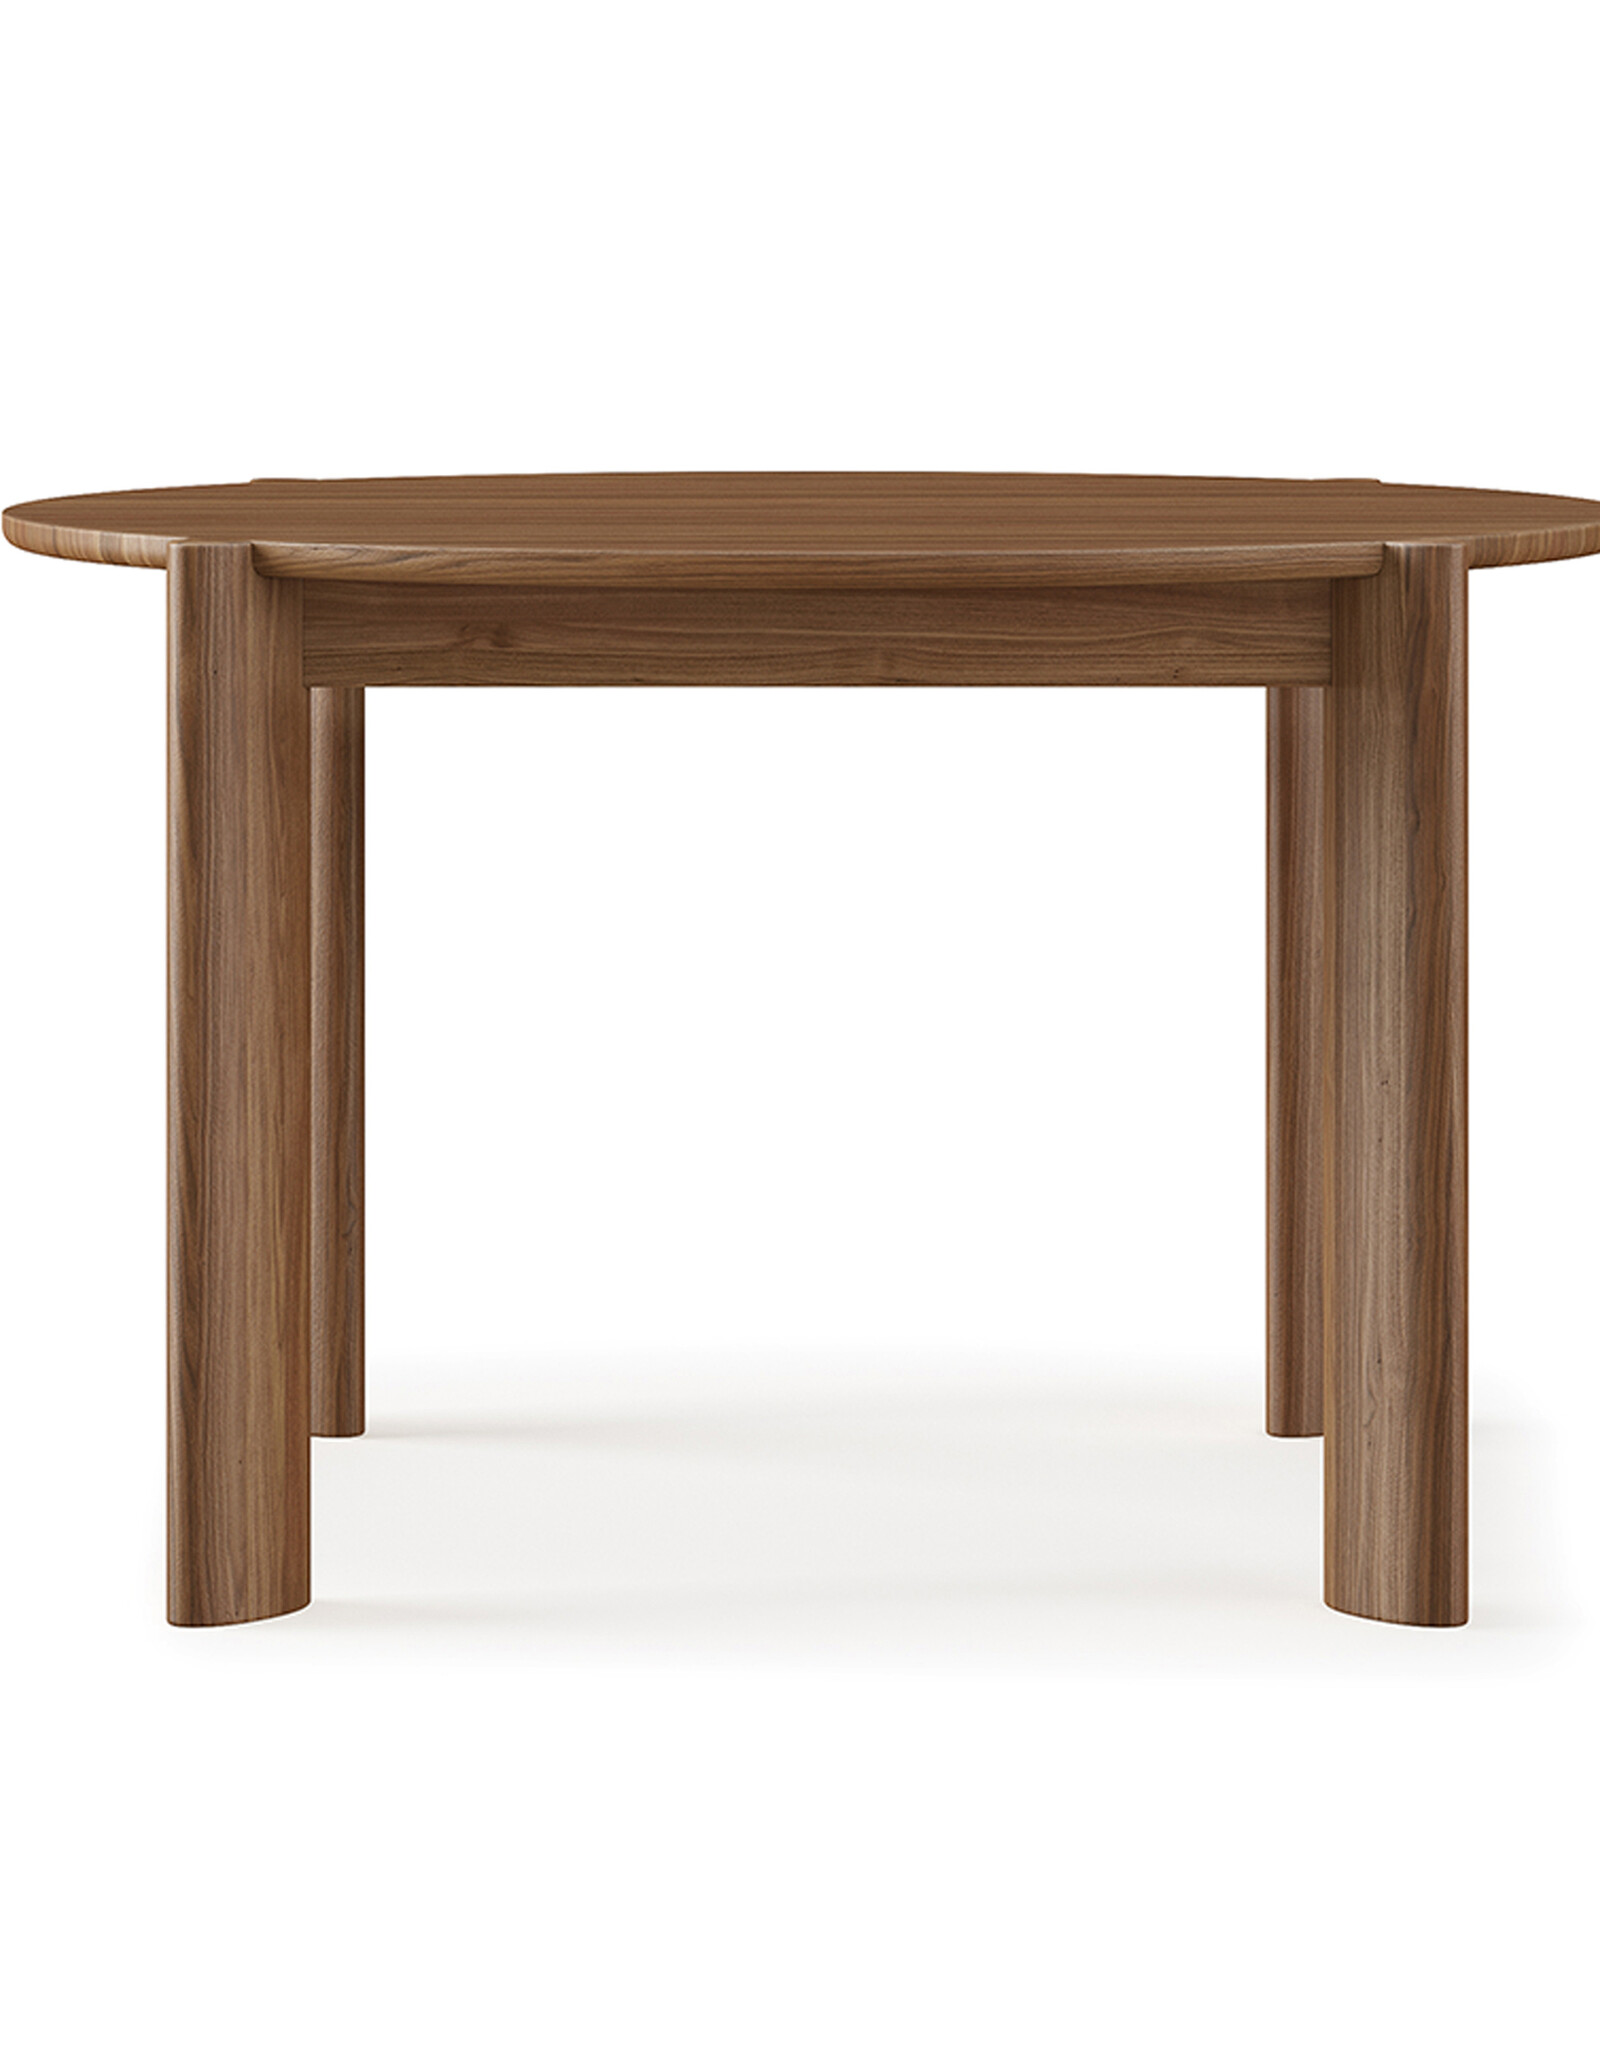 Gus* Modern Bancroft Round Dining Table